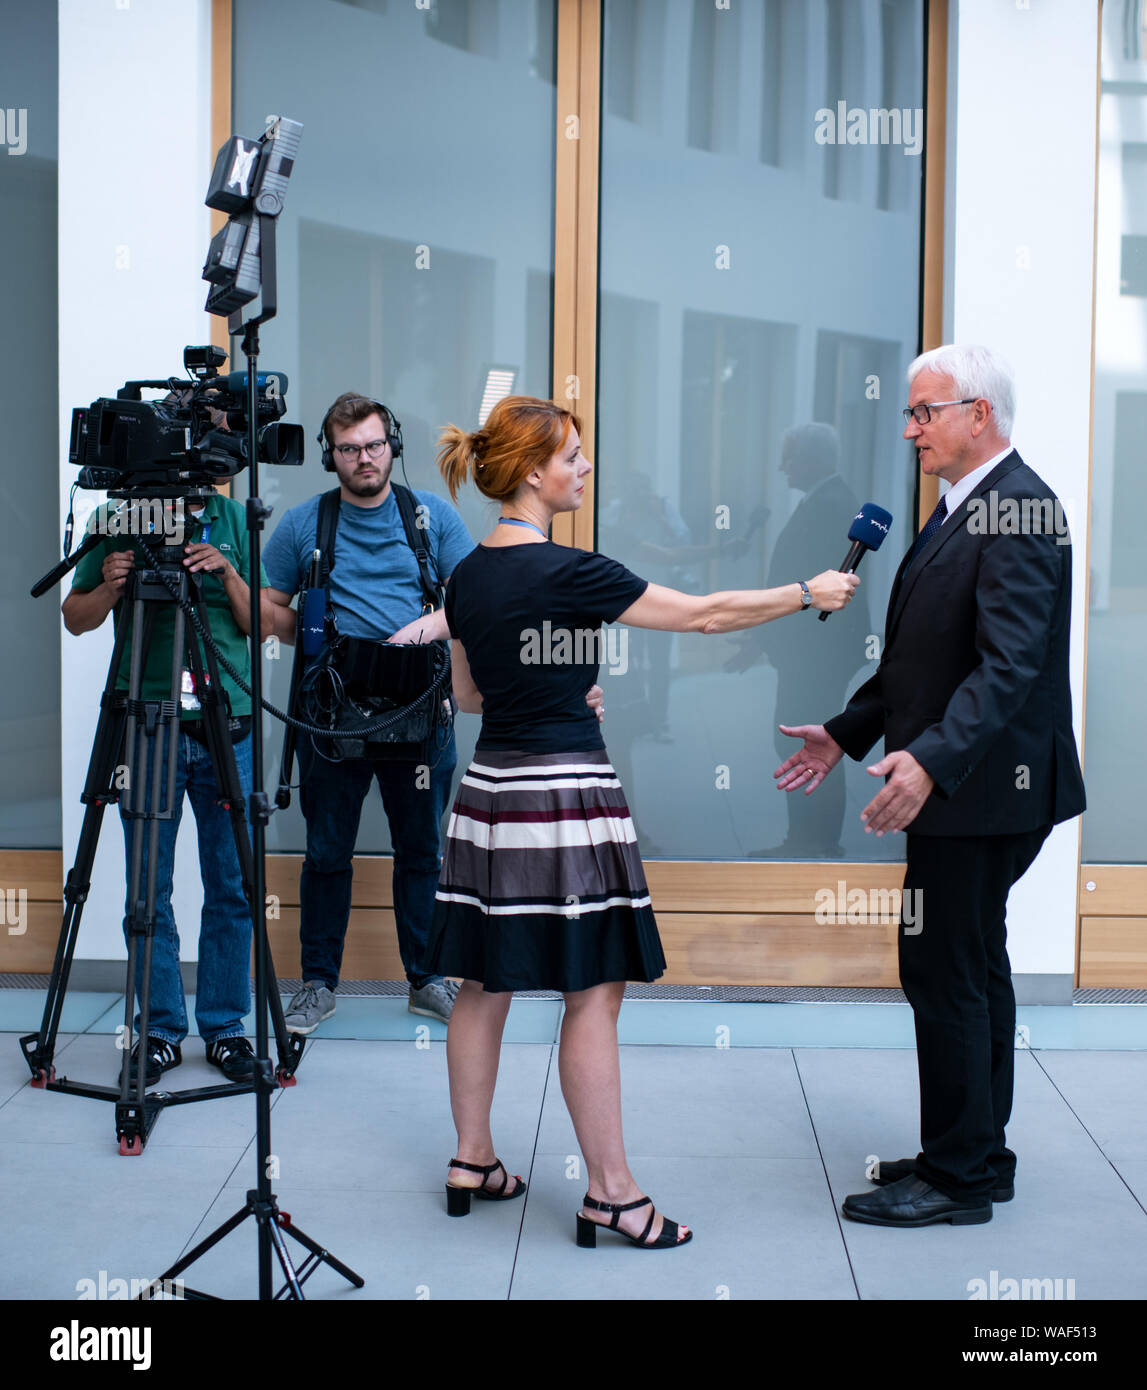 Berlin, Germany. 20th Aug, 2019. Jürgen Resch, Managing Director of Deutsche Umwelthilfe (DUH), is interviewed by a television team on the occasion of a press conference of Deutsche Umwelthilfe on the future of the automotive industry in Germany at the Haus der Bundespressekonferenz. Credit: Bernd von Jutrczenka/dpa/Alamy Live News Stock Photo